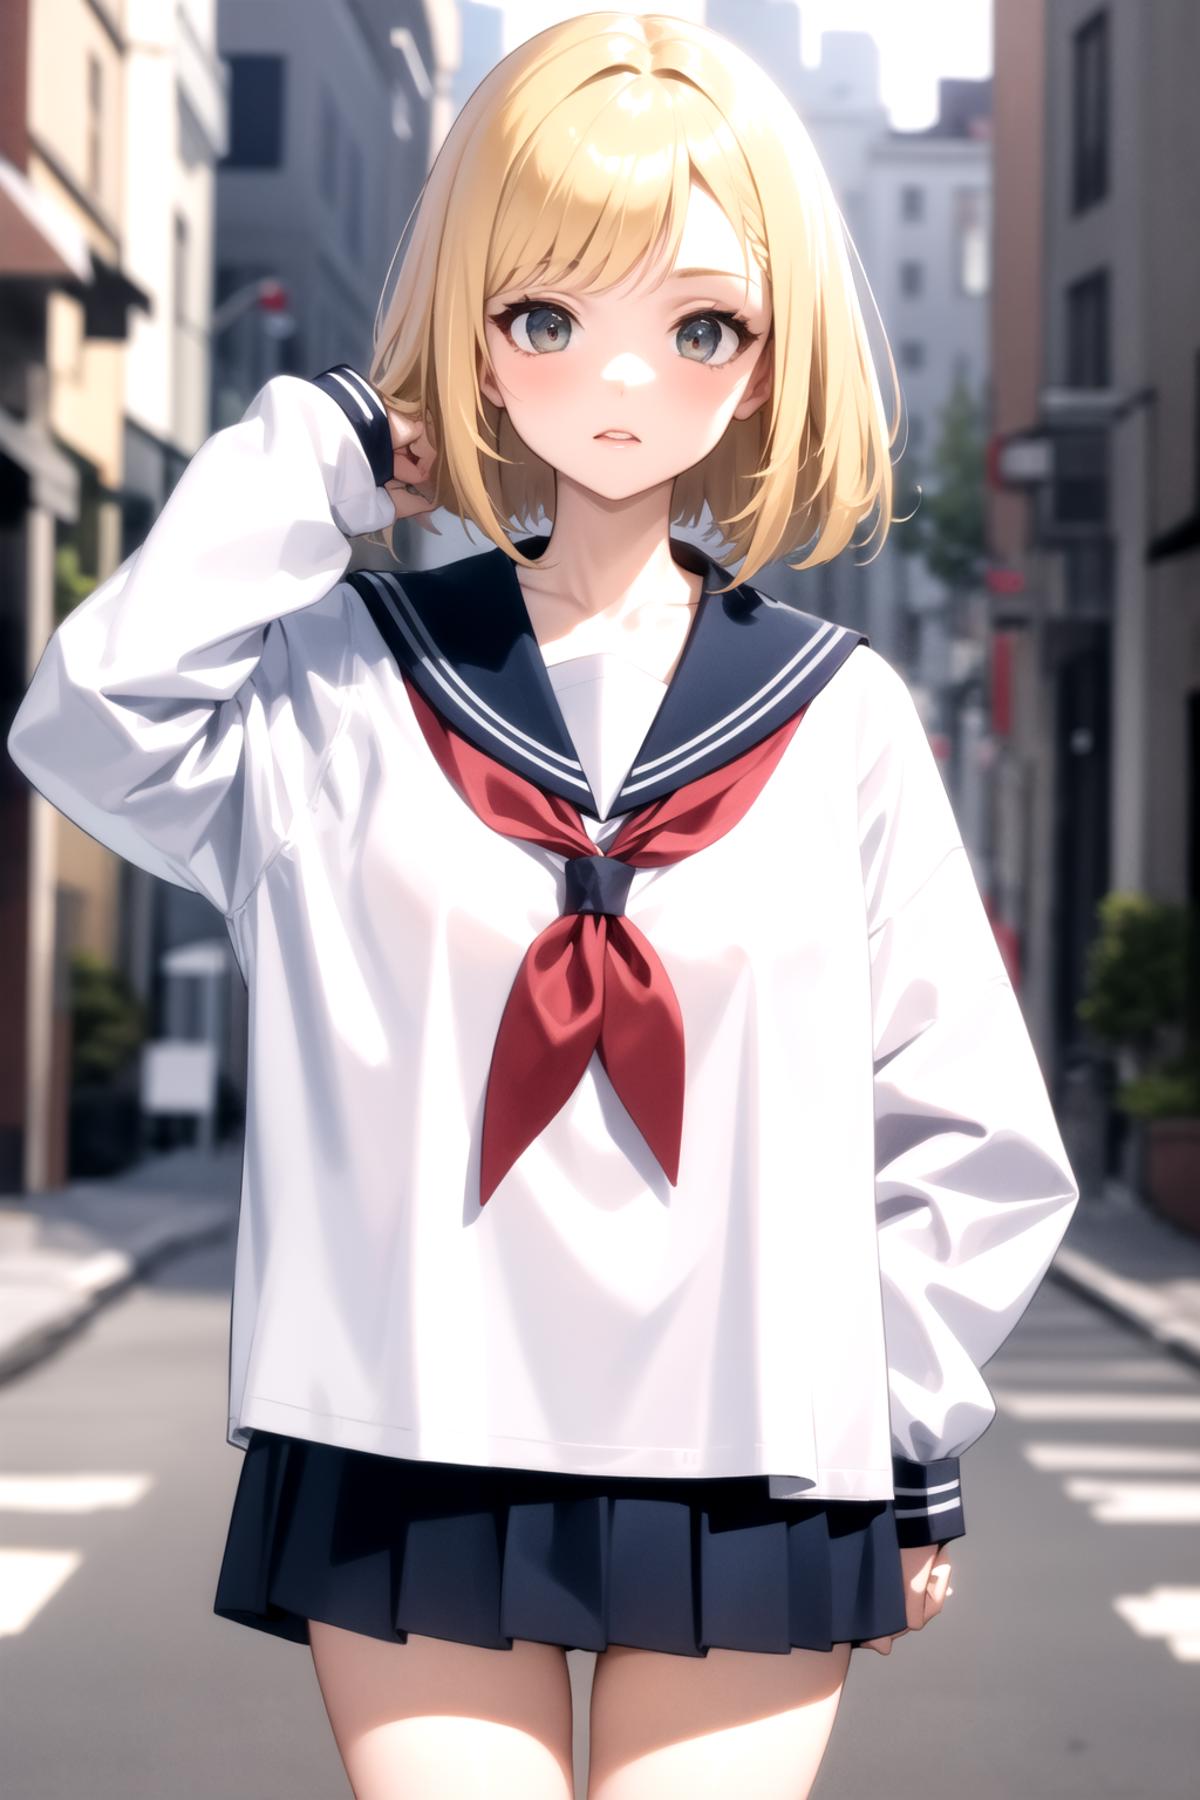 A cartoon illustration of a girl wearing a white shirt with red and blue accents, a red bow tie, and black shorts.